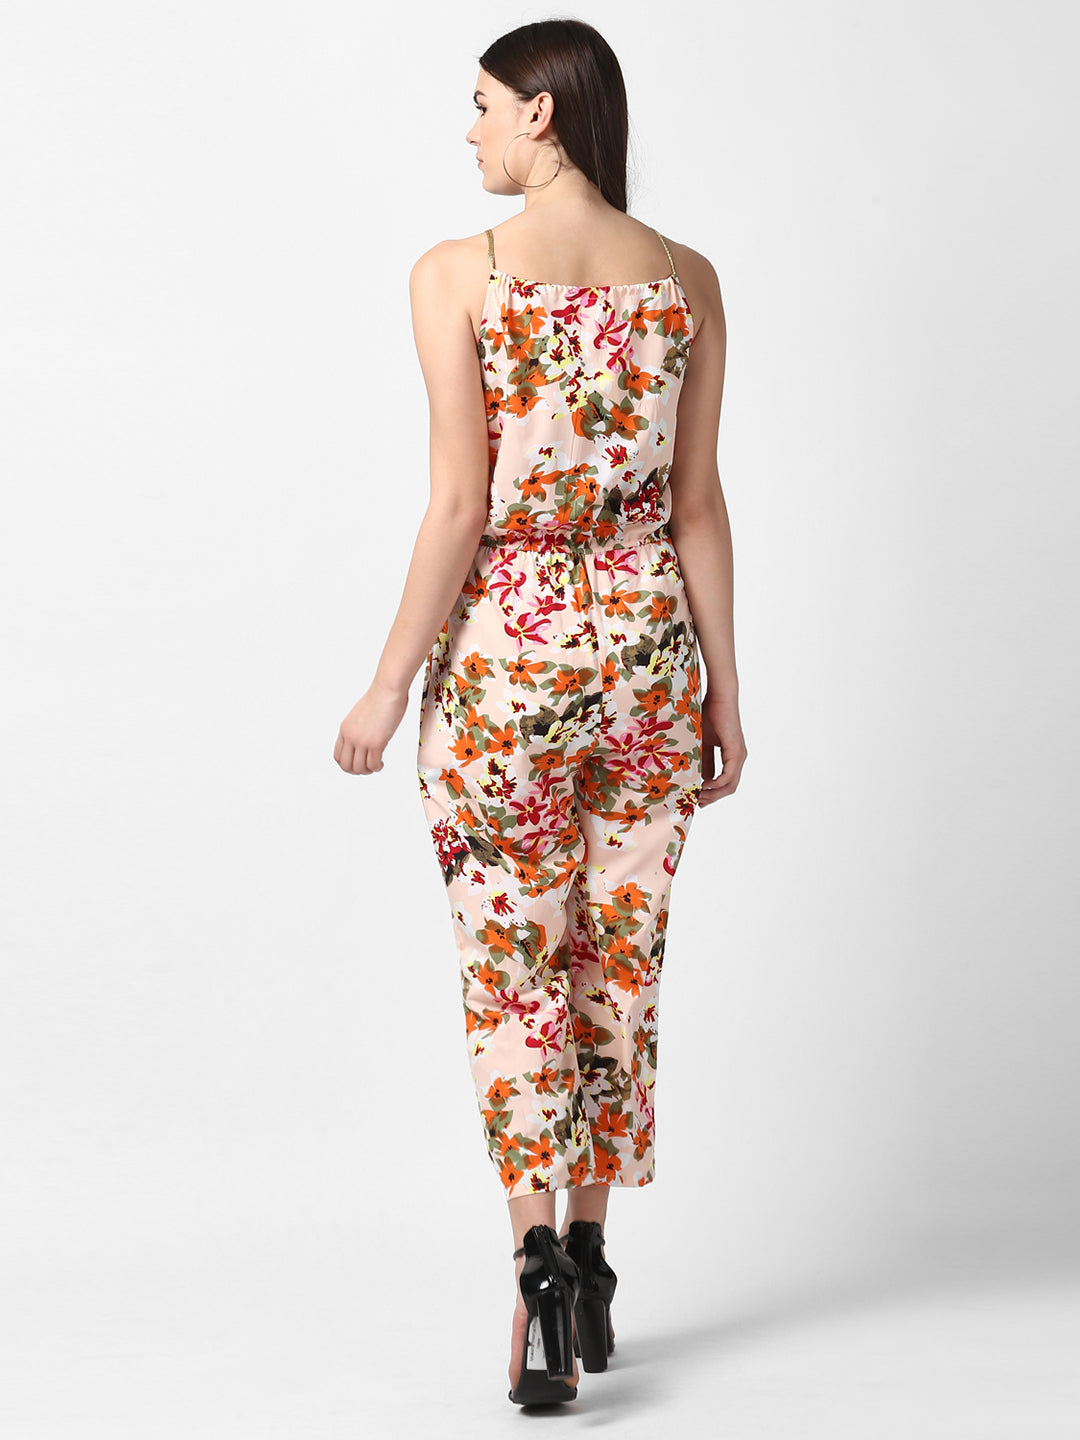 Women's Floral Printed Jumpsuit with Gold Lace Neckstrap